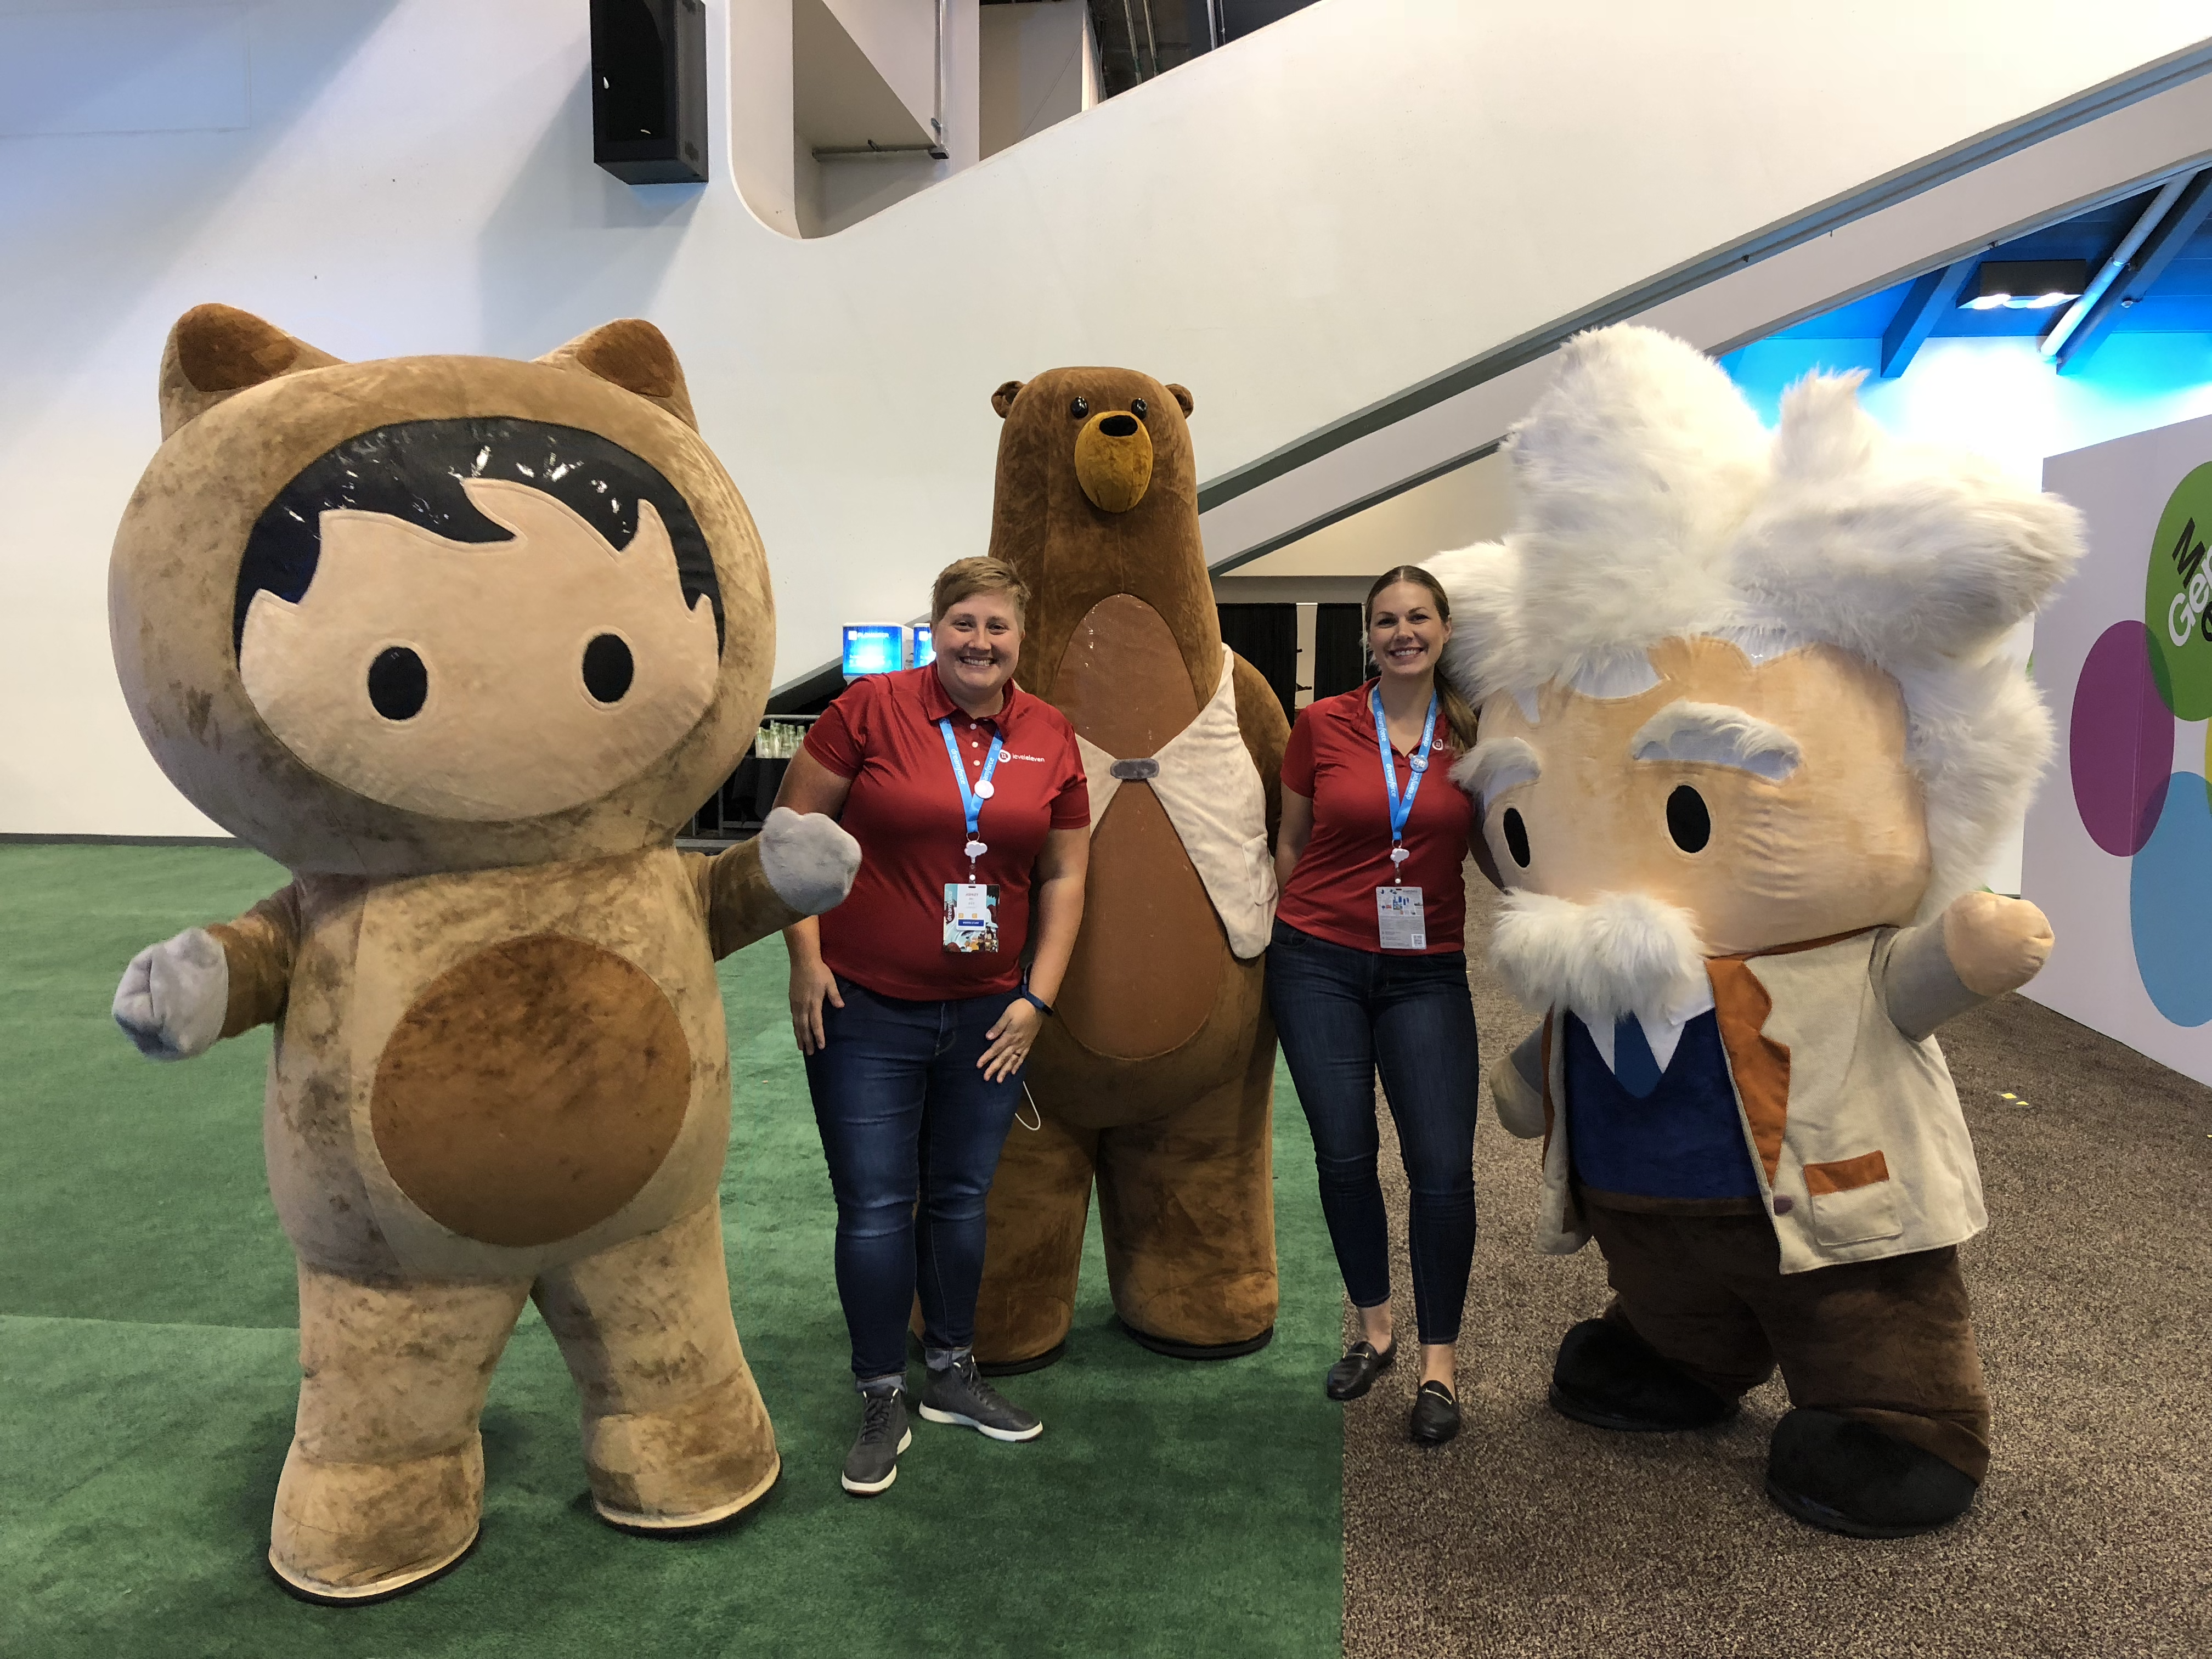 Why You Should Attend Dreamforce 2019